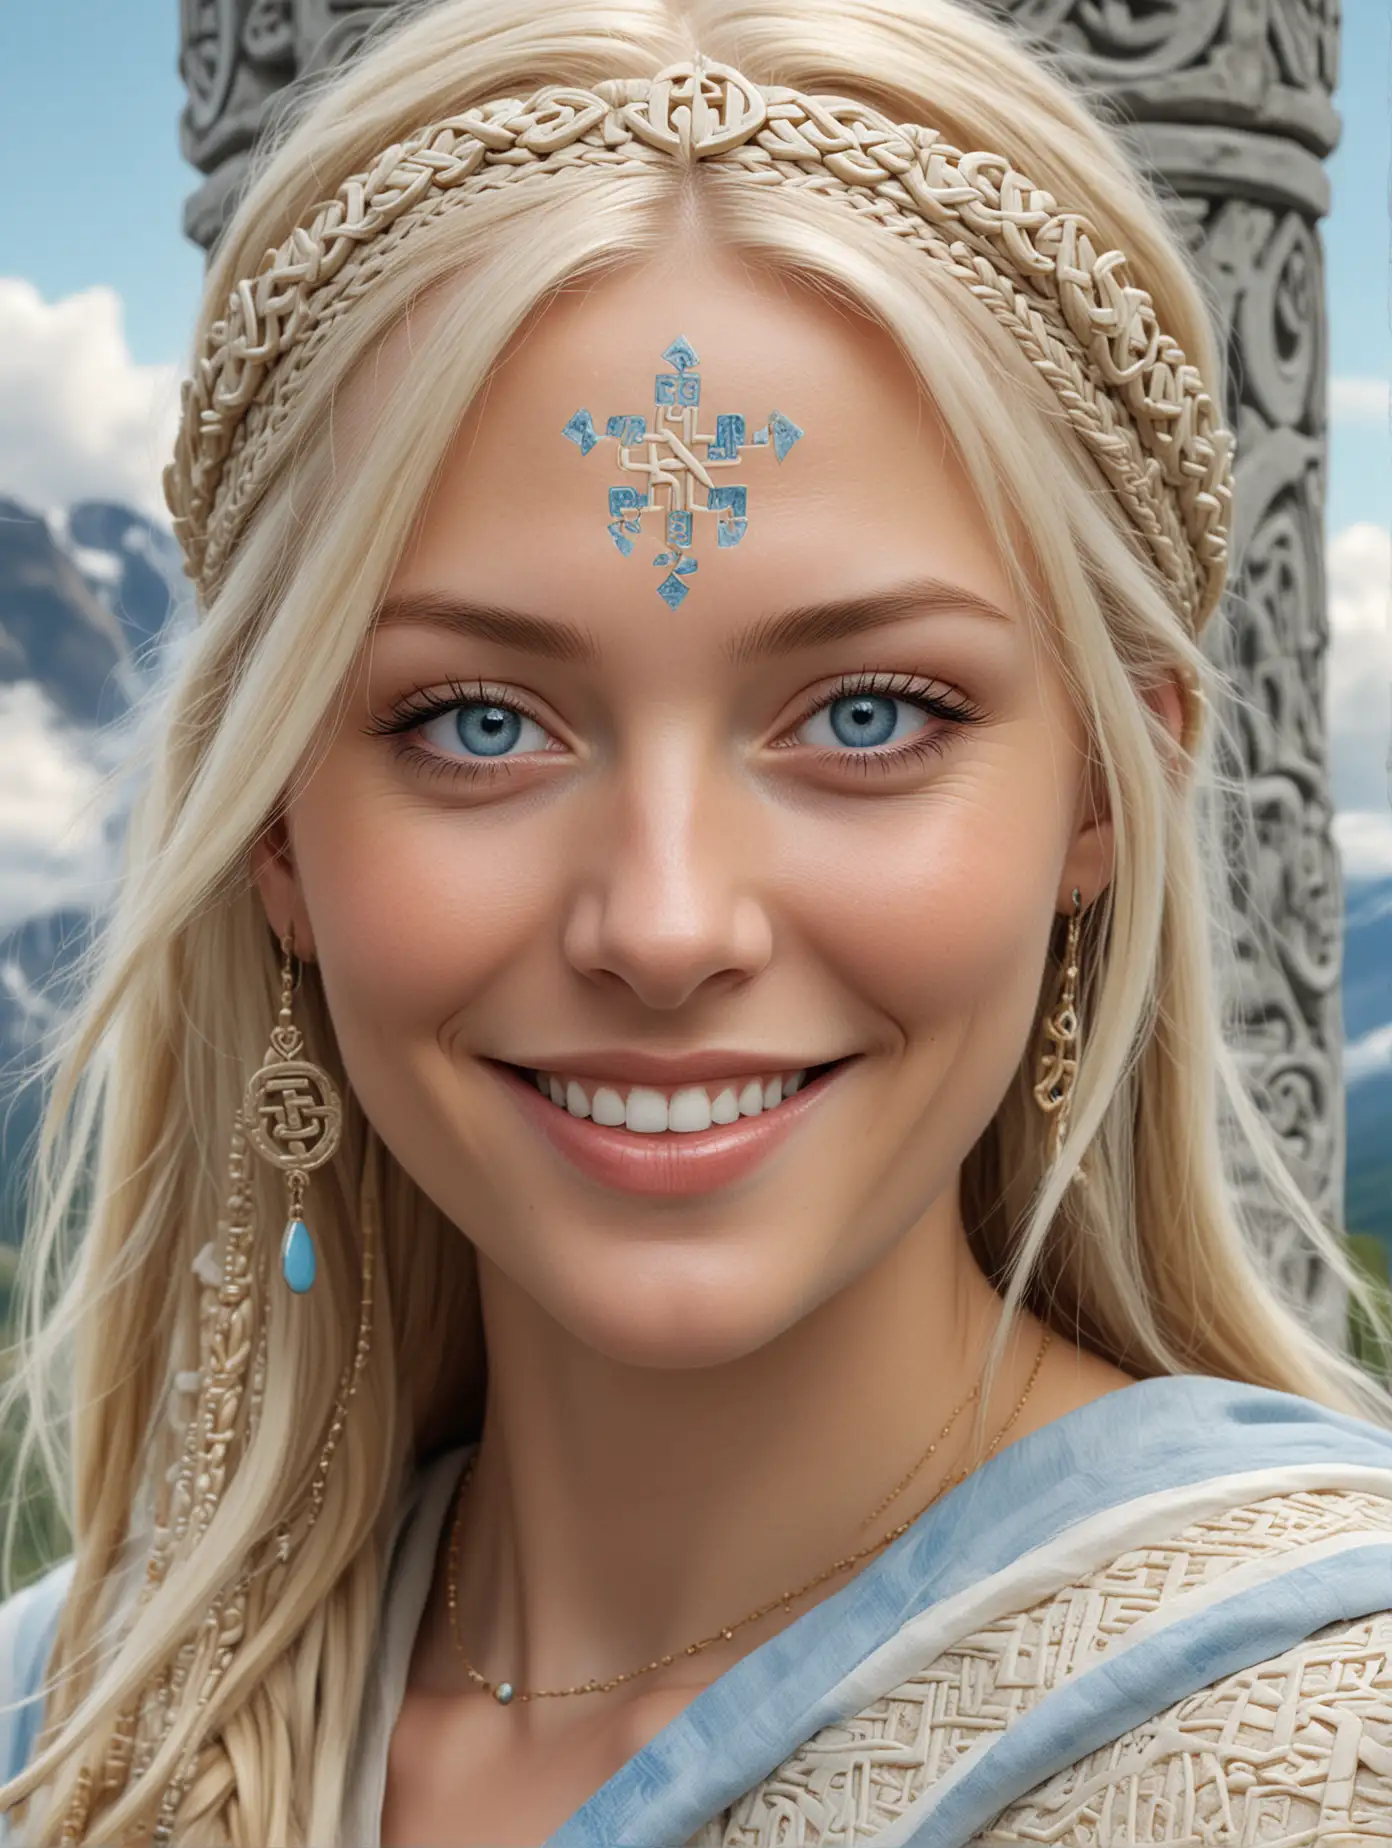 A portrait of a smiling nordic female priestess, blue eyes, a very long blond hair wearing light blue and light yellow long drape adorned with many runic symbols : 1. | Vhite stone carved columns : 1. |Mountain top : .9 | Clouds and blue sky: .9 | Very detailed, sunny, windy, misty atmosphere : 1. | Highly detailed,high precision,focus on textures, hyperrealistic : 1.